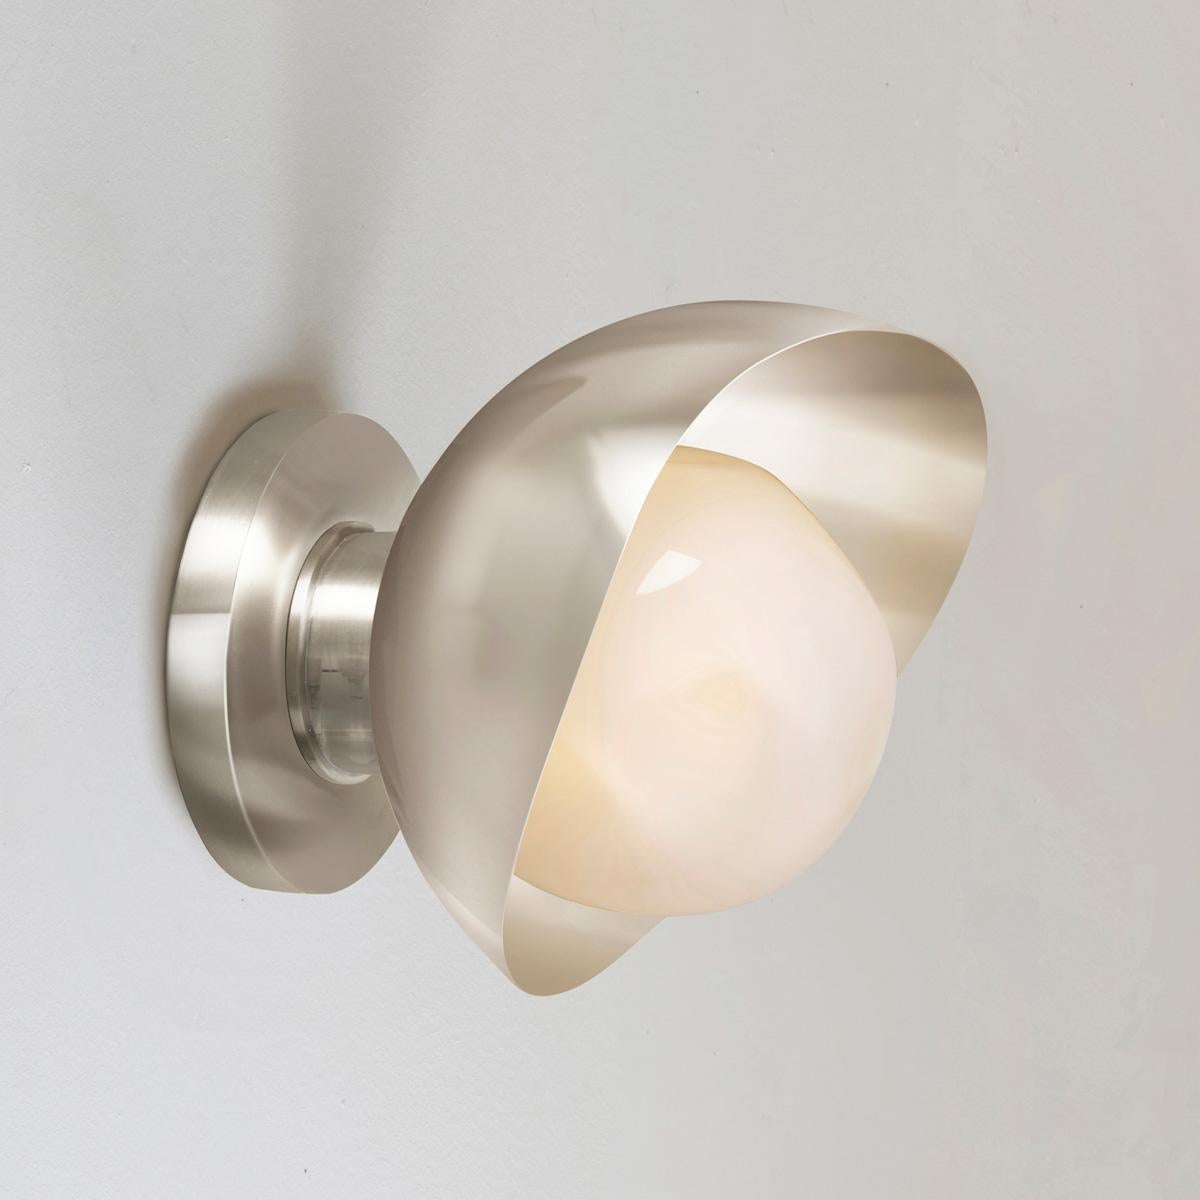 Perla Mini Wall Light by Gaspare Asaro. Sand White and Satin Brass Finish For Sale 2